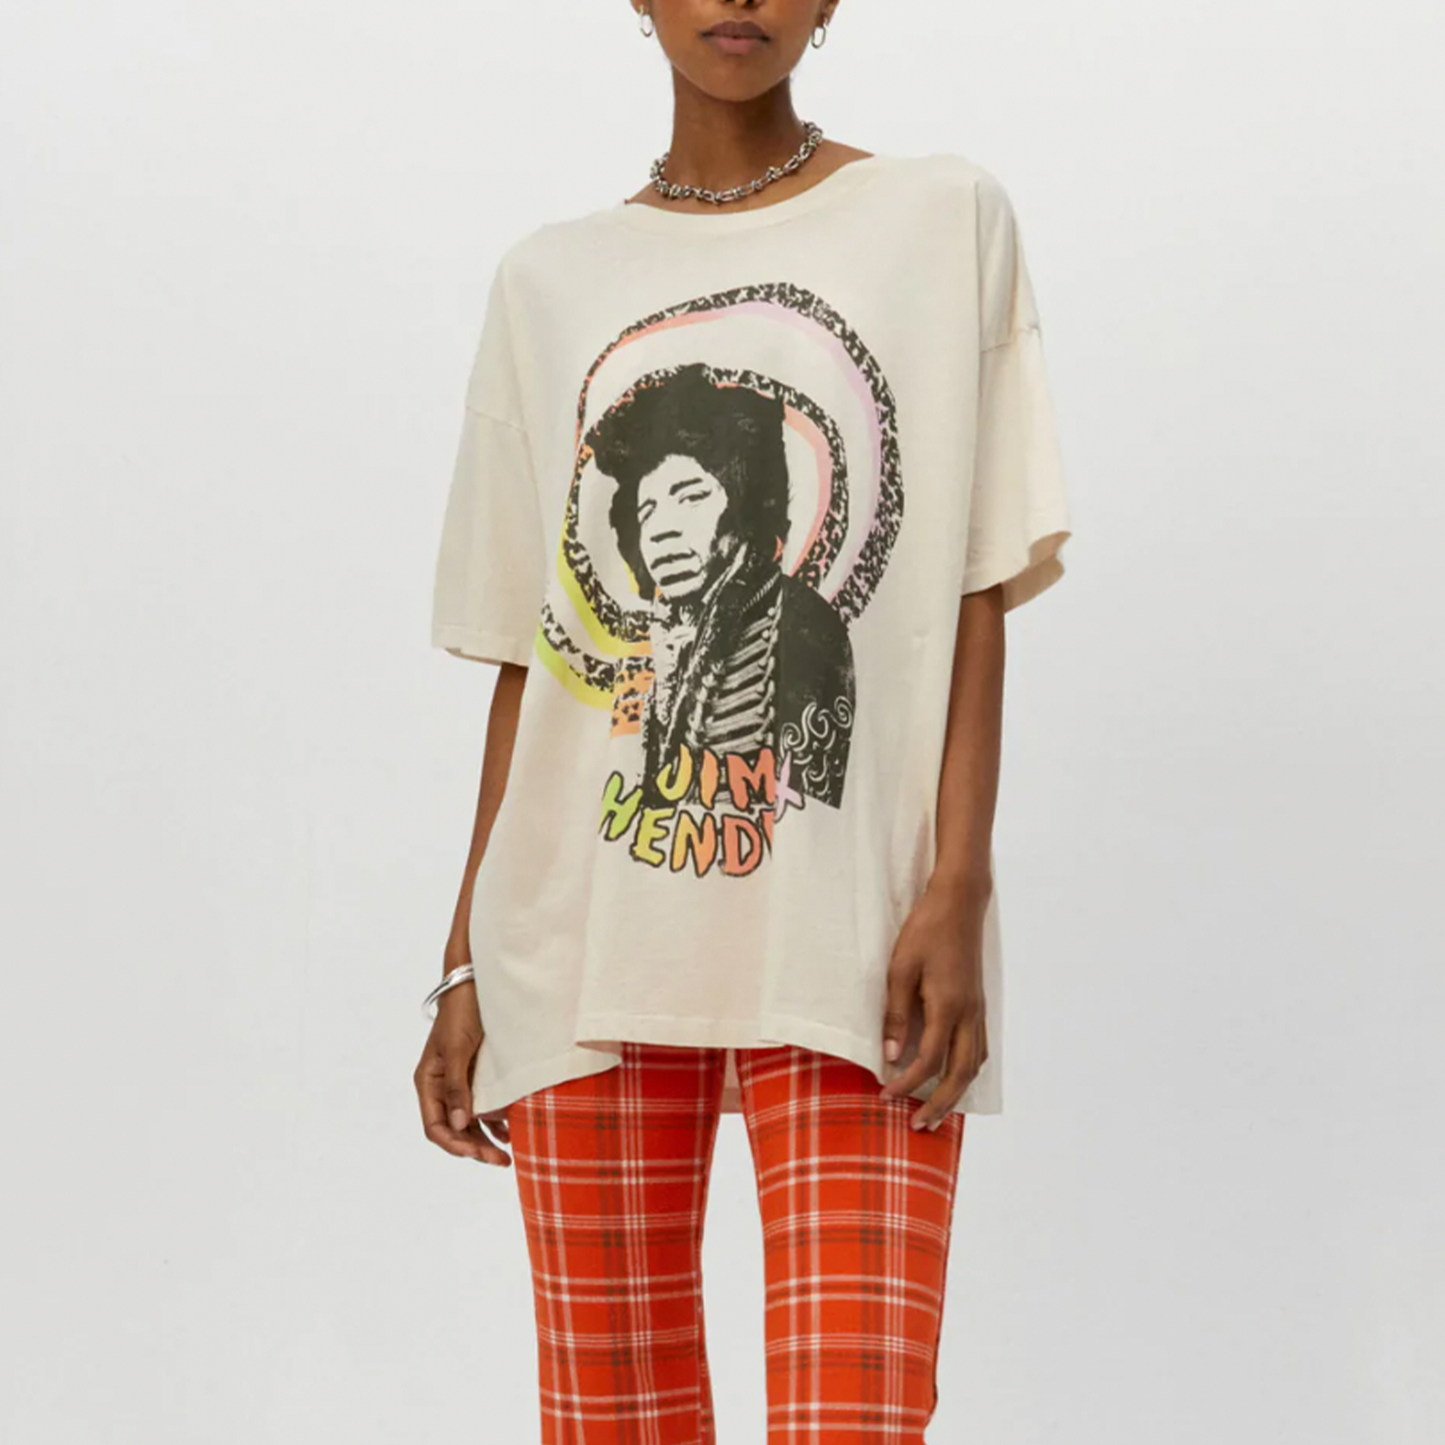 Day Dreamer Jimi Hendrix Spiral Tee. A portrait of the jack of all trades hits center on this relaxed merch tee highlighted in a multi-colored spiral with the icon’s name in hand-drawn letters. A creative rendition for one of the most creative himself